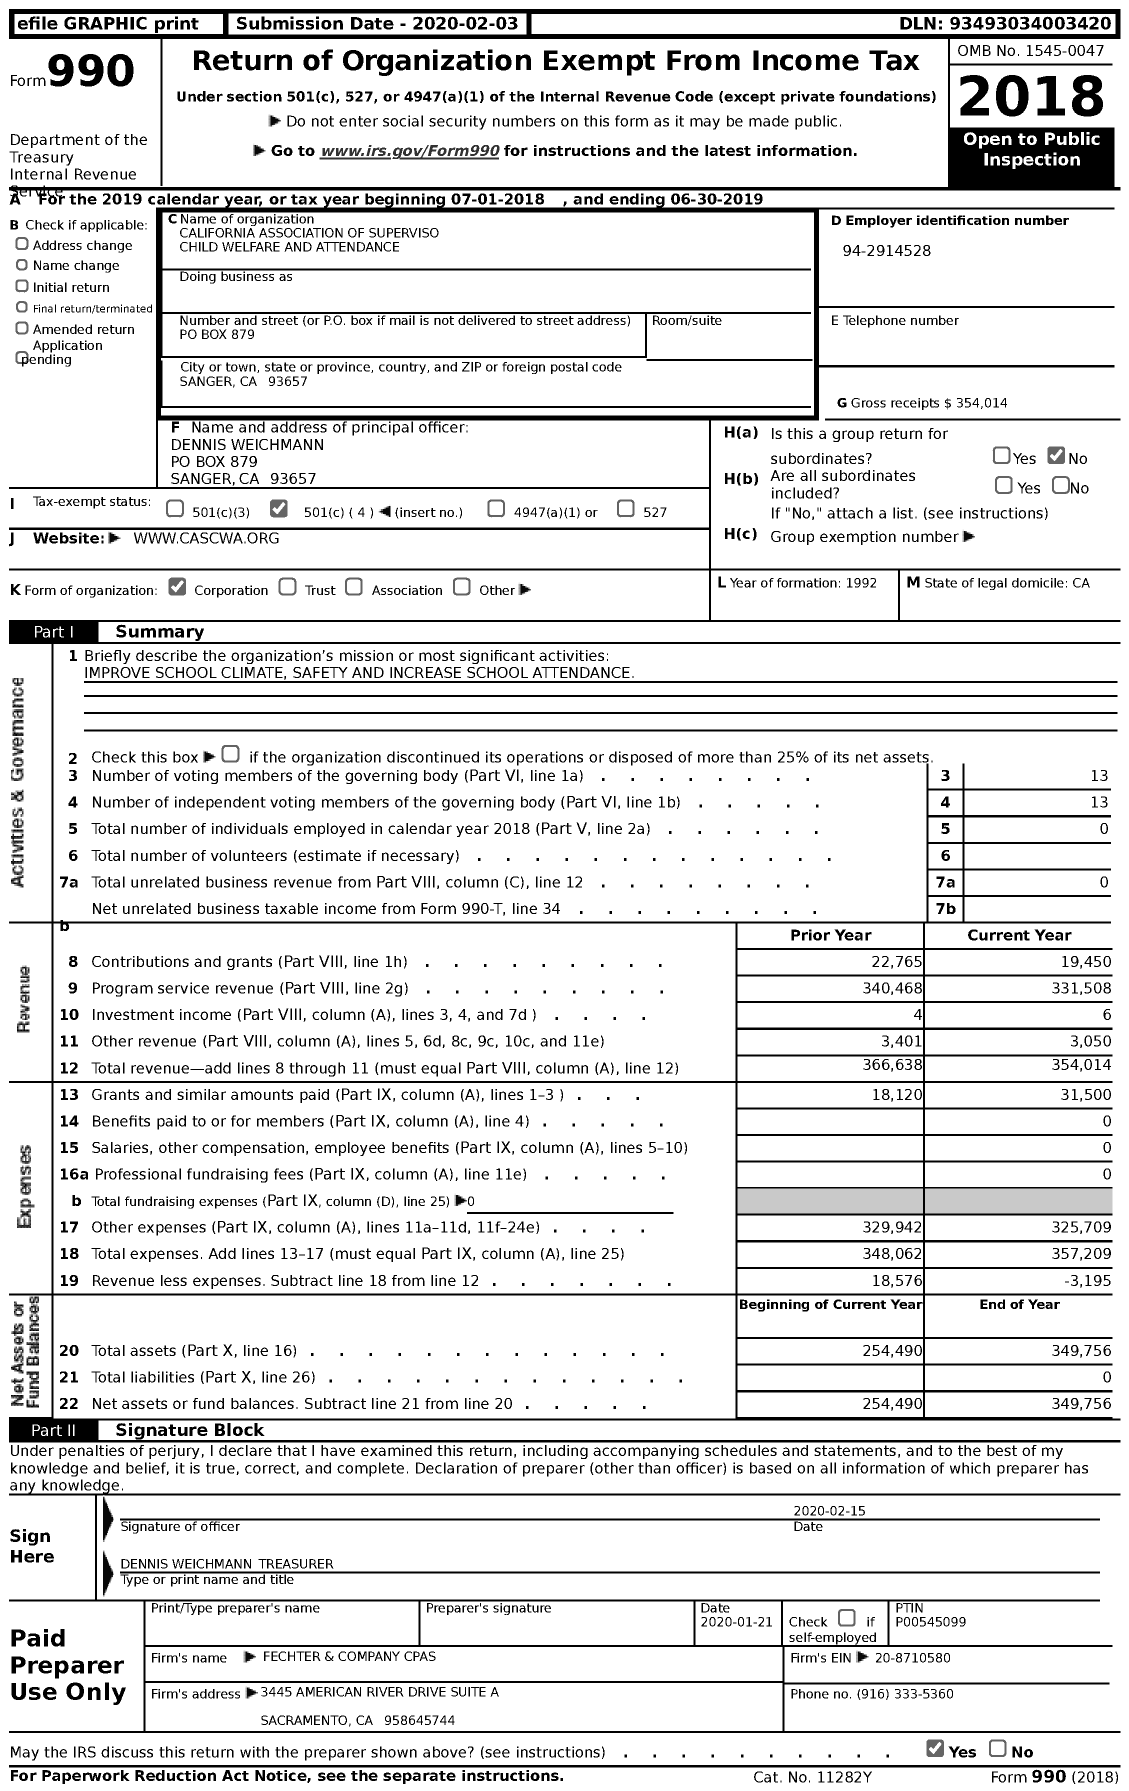 Image of first page of 2018 Form 990 for California Association of Supervisors Child Welfare and Attendance